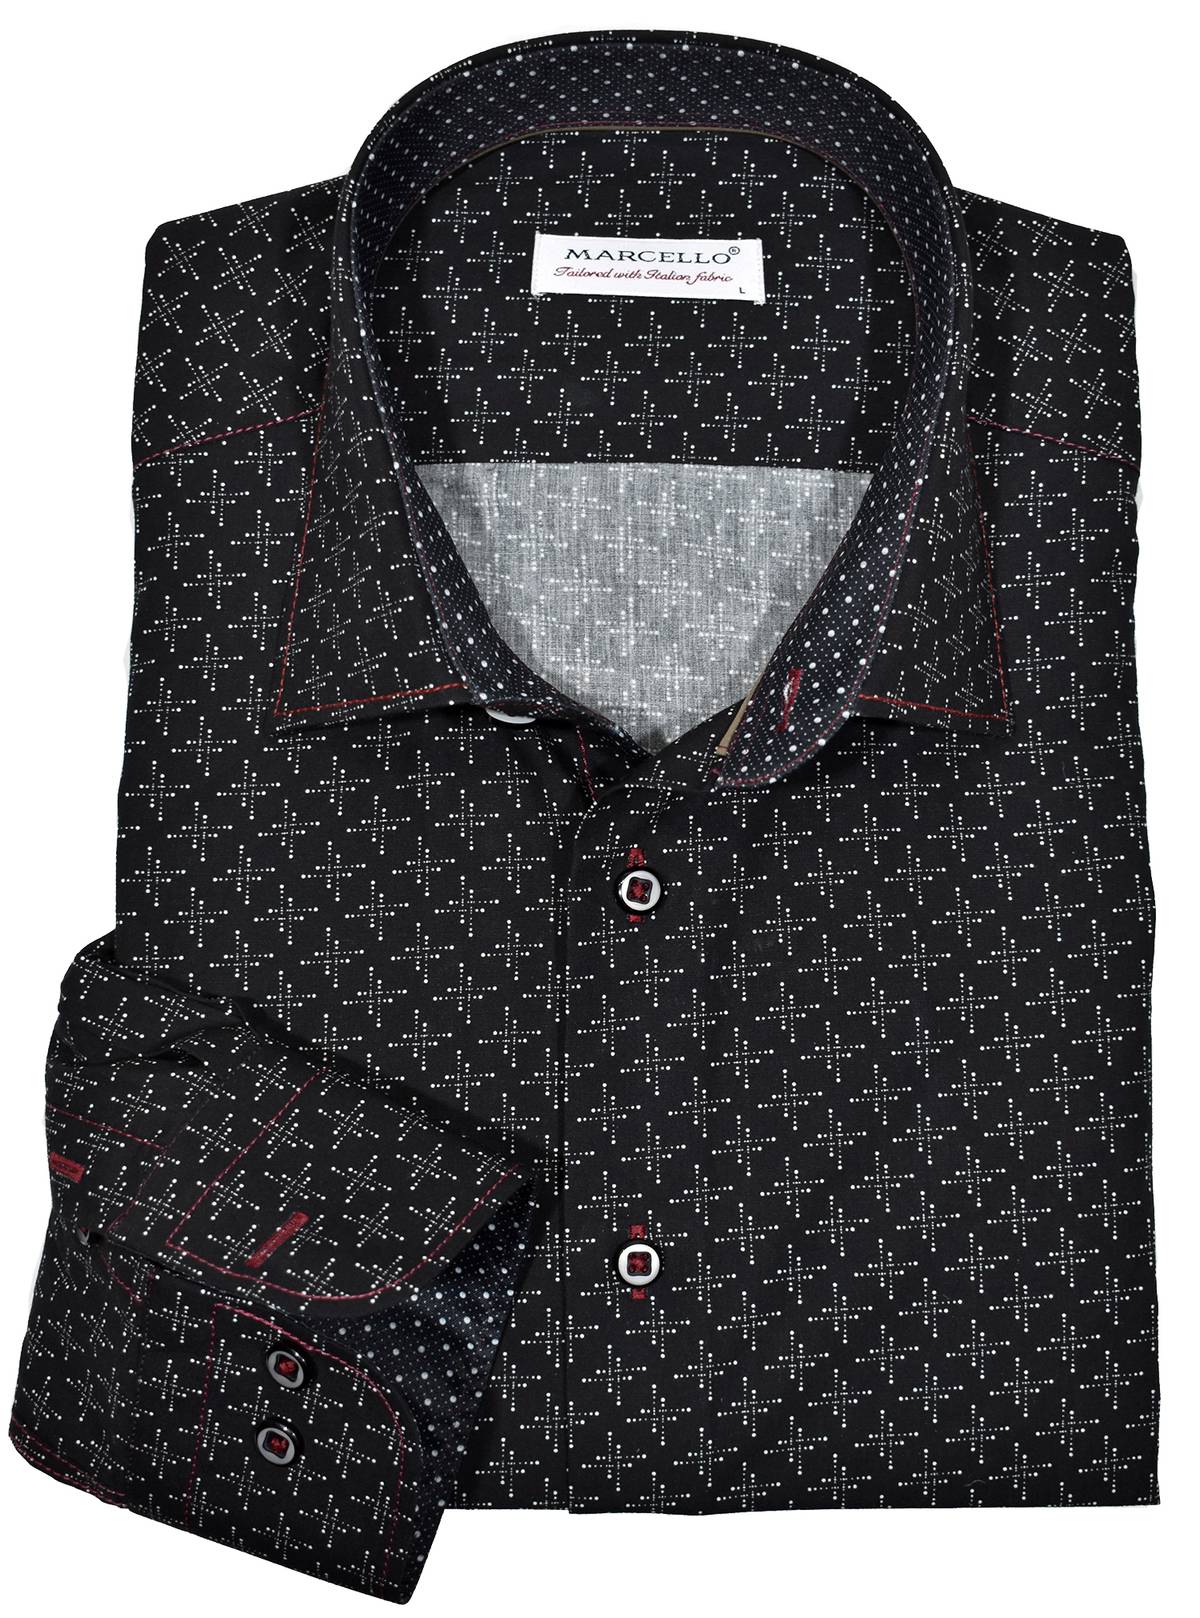 Perfect for a night out this cotton shirt features a unique floating geometric pattern and allover contrast red stitching.  The fashion style, custom buttons and matched trim fabric pair extremely well with black or gray family buttons.  Color is black with light gray detail.  Soft cotton fabric.  Custom button and stitch detailing. Second cuff placket button for the perfect cuff turn up.  Classic shaped fit, perfect for a medium build.